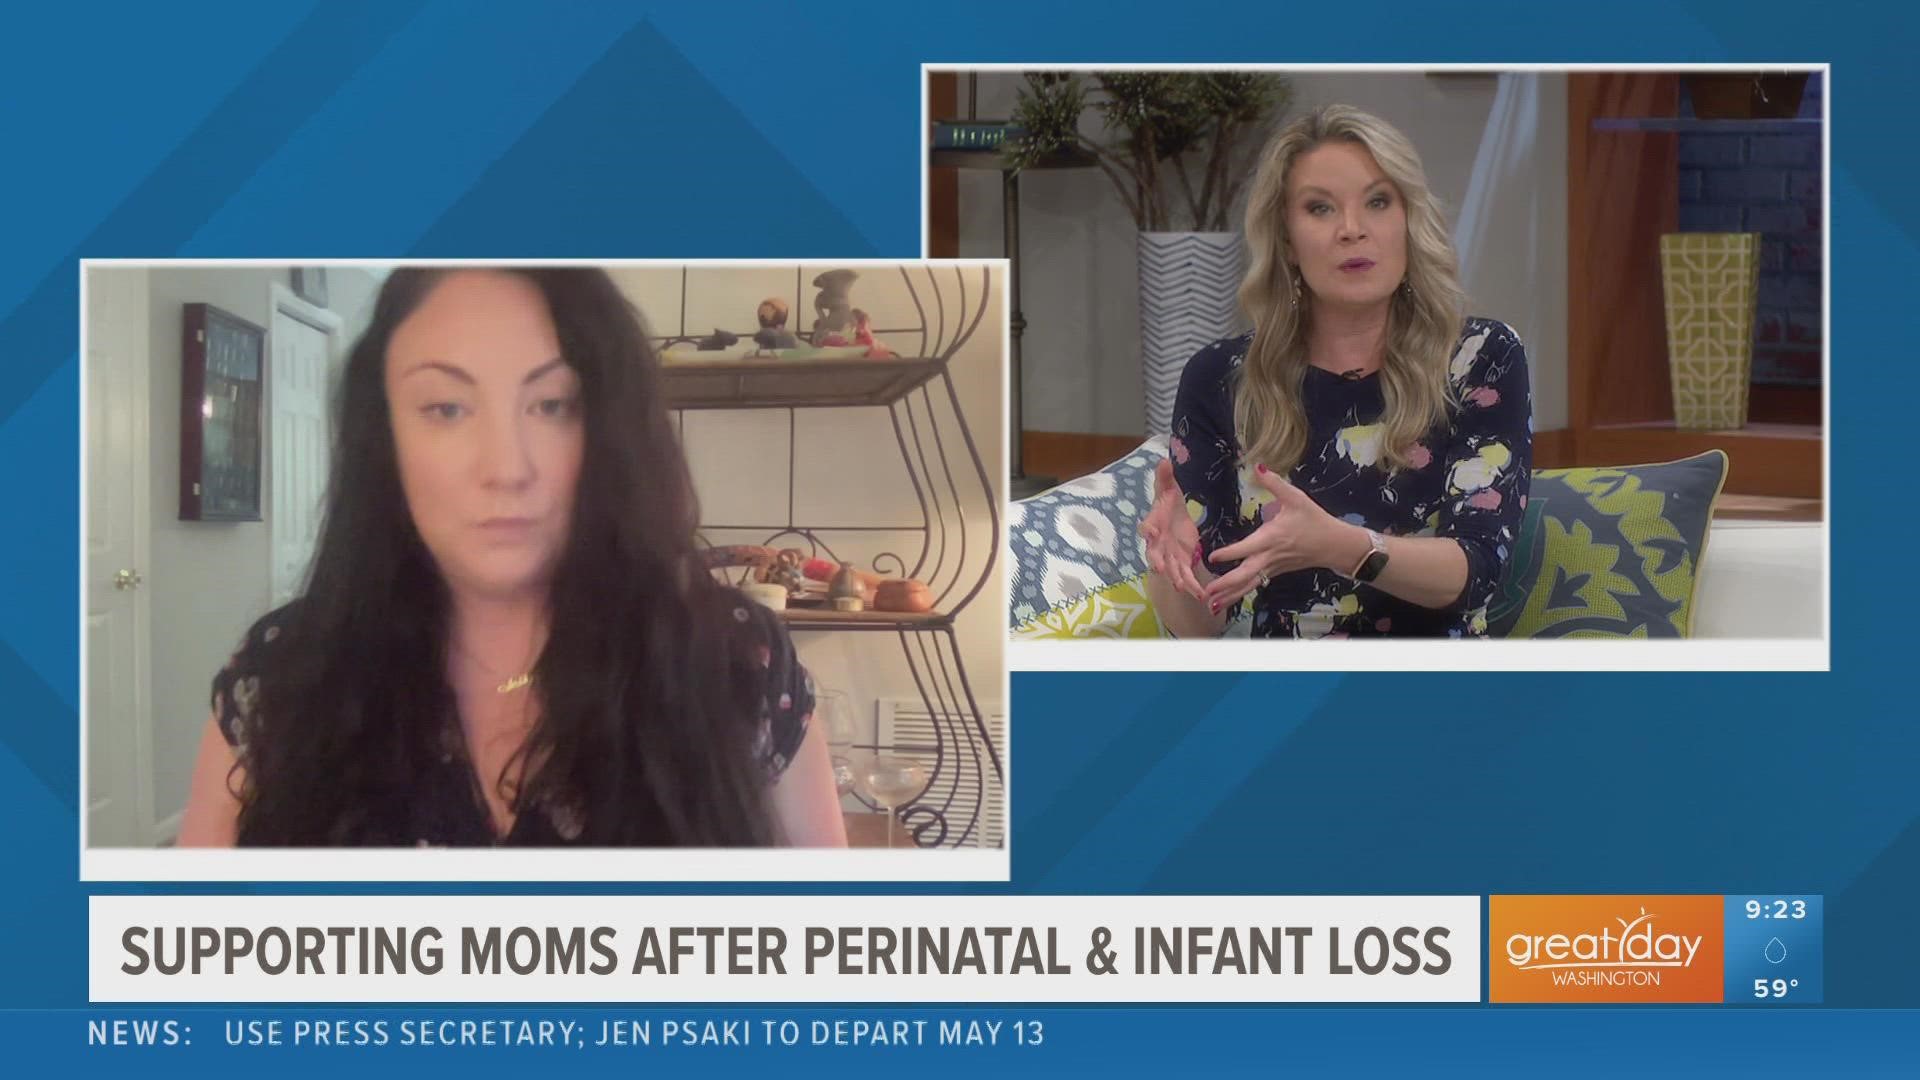 Kristen talks to Elizabeth O'Donnell who lost her daughter Aaliyah. She created an organization called "Aaliyah in Action" to support moms who lost their their baby.